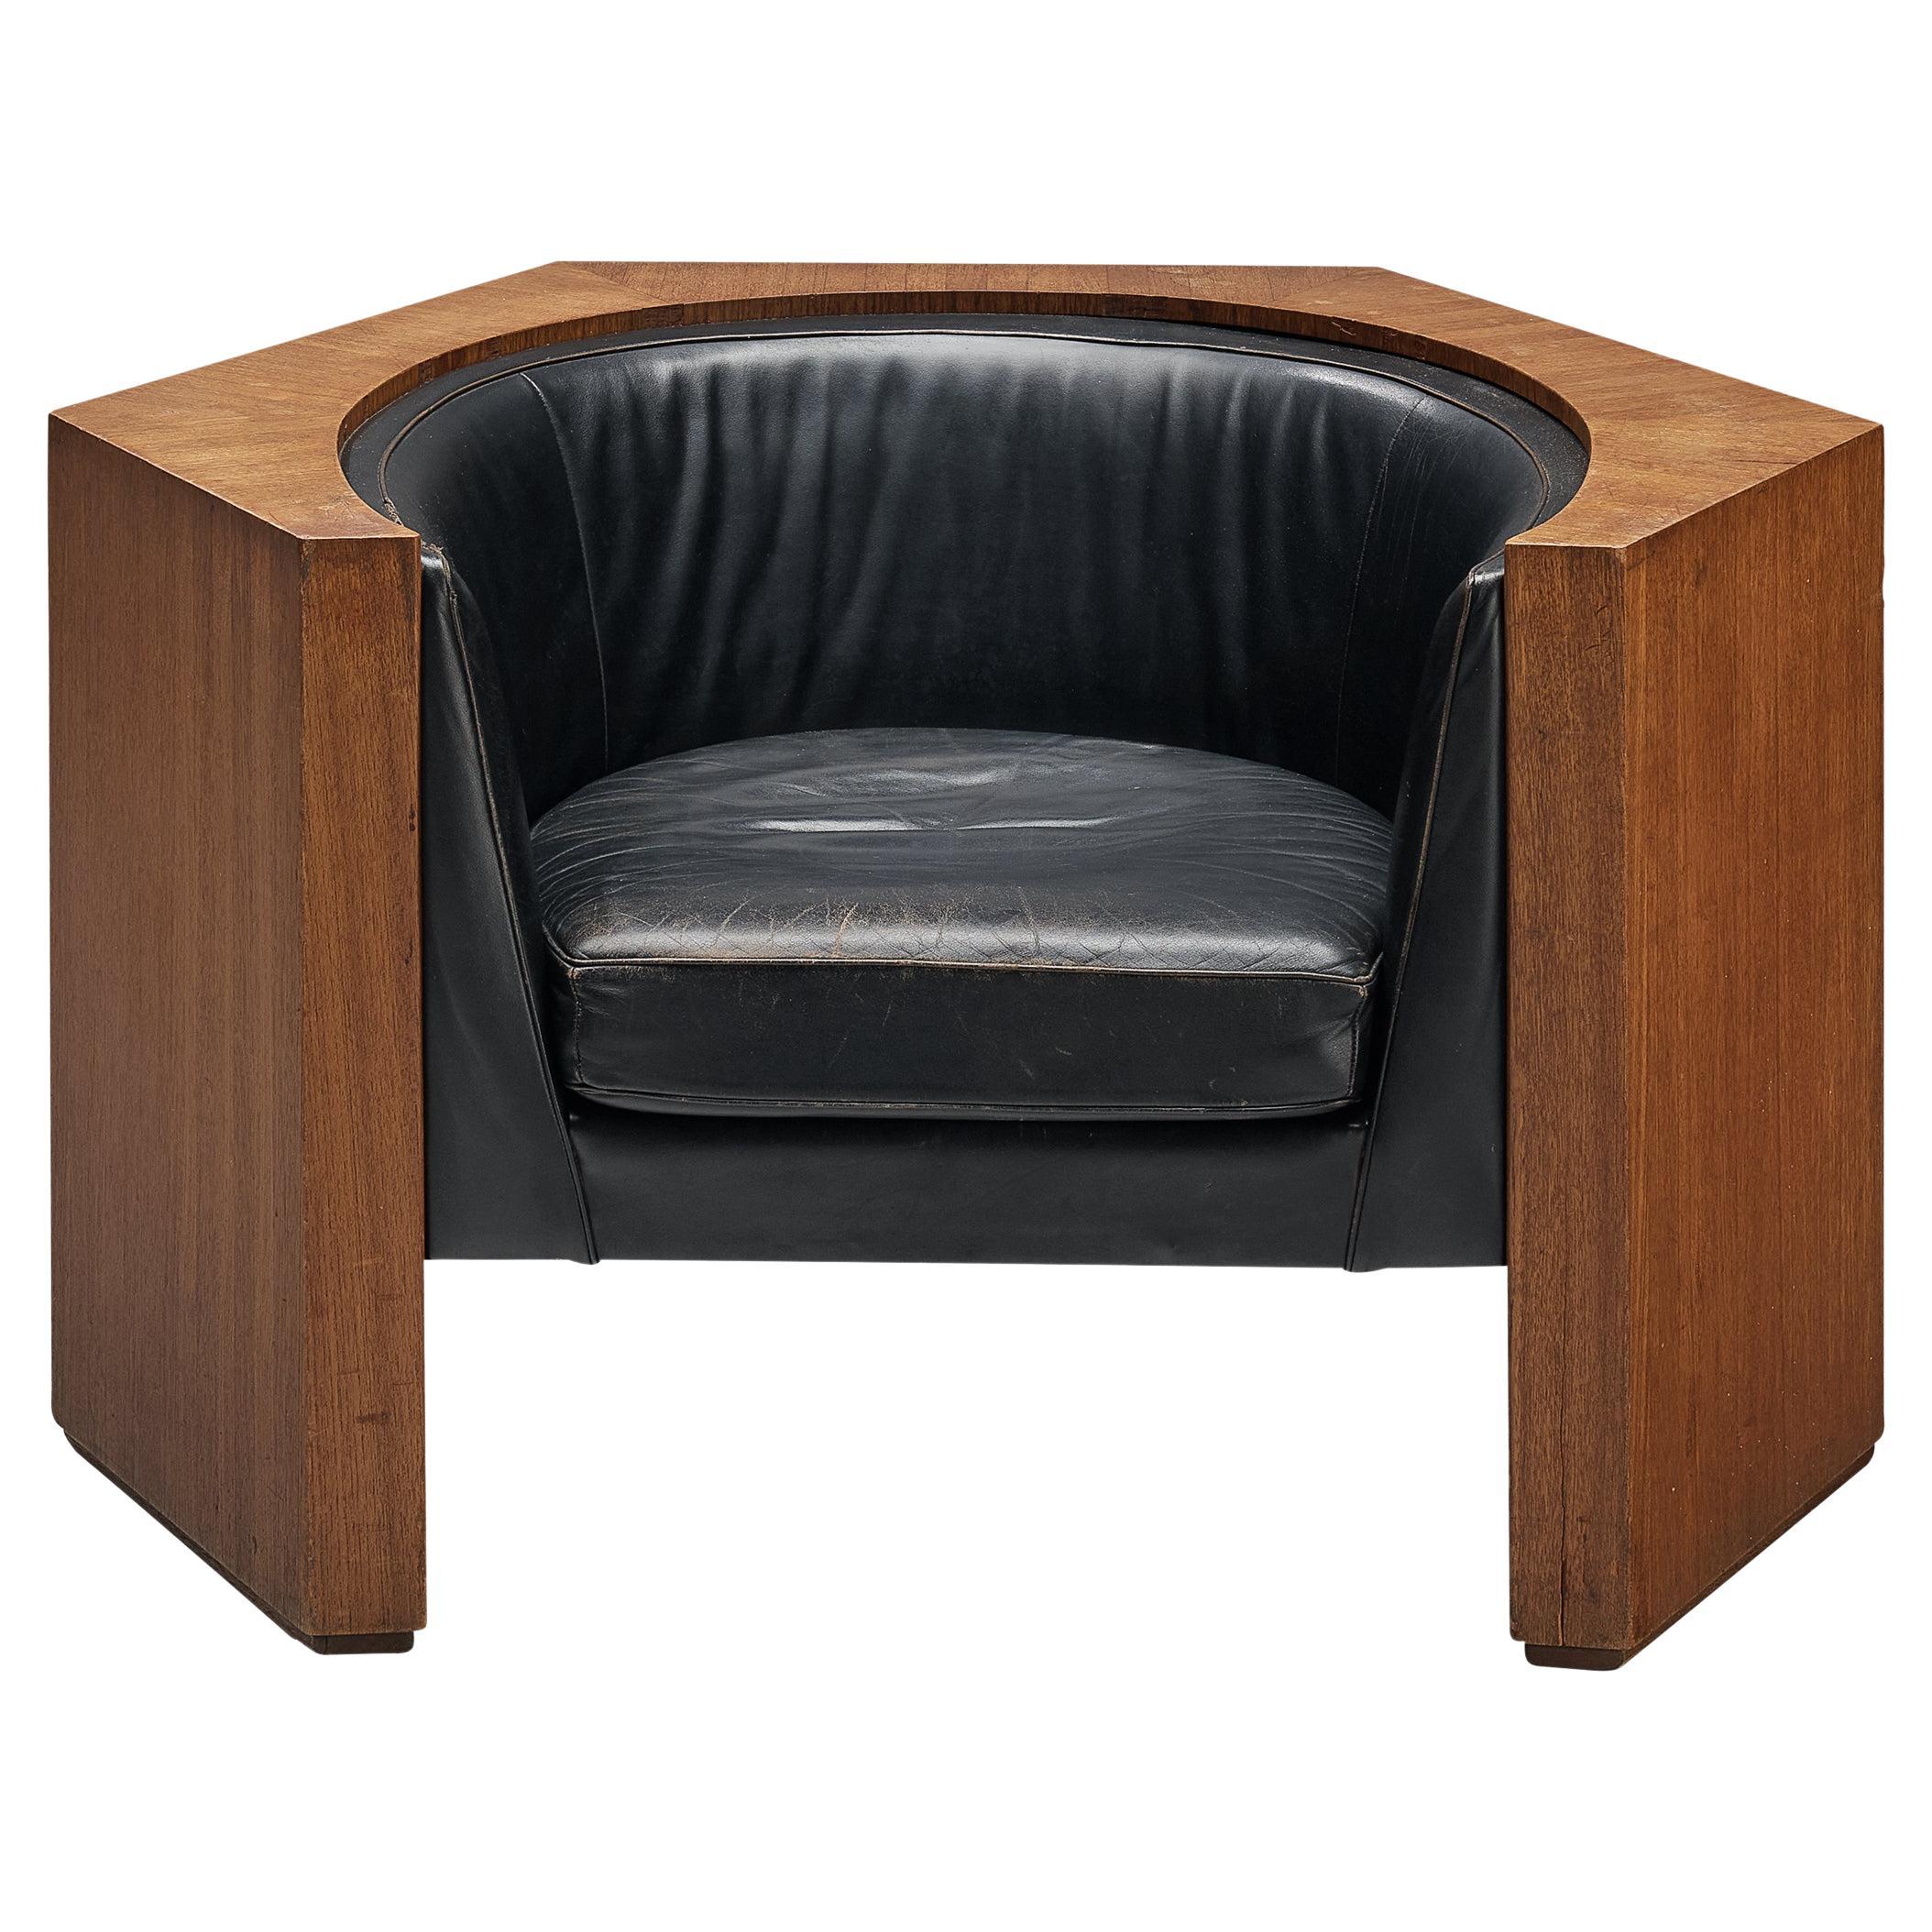 Club Chair in Teak and Black Leather